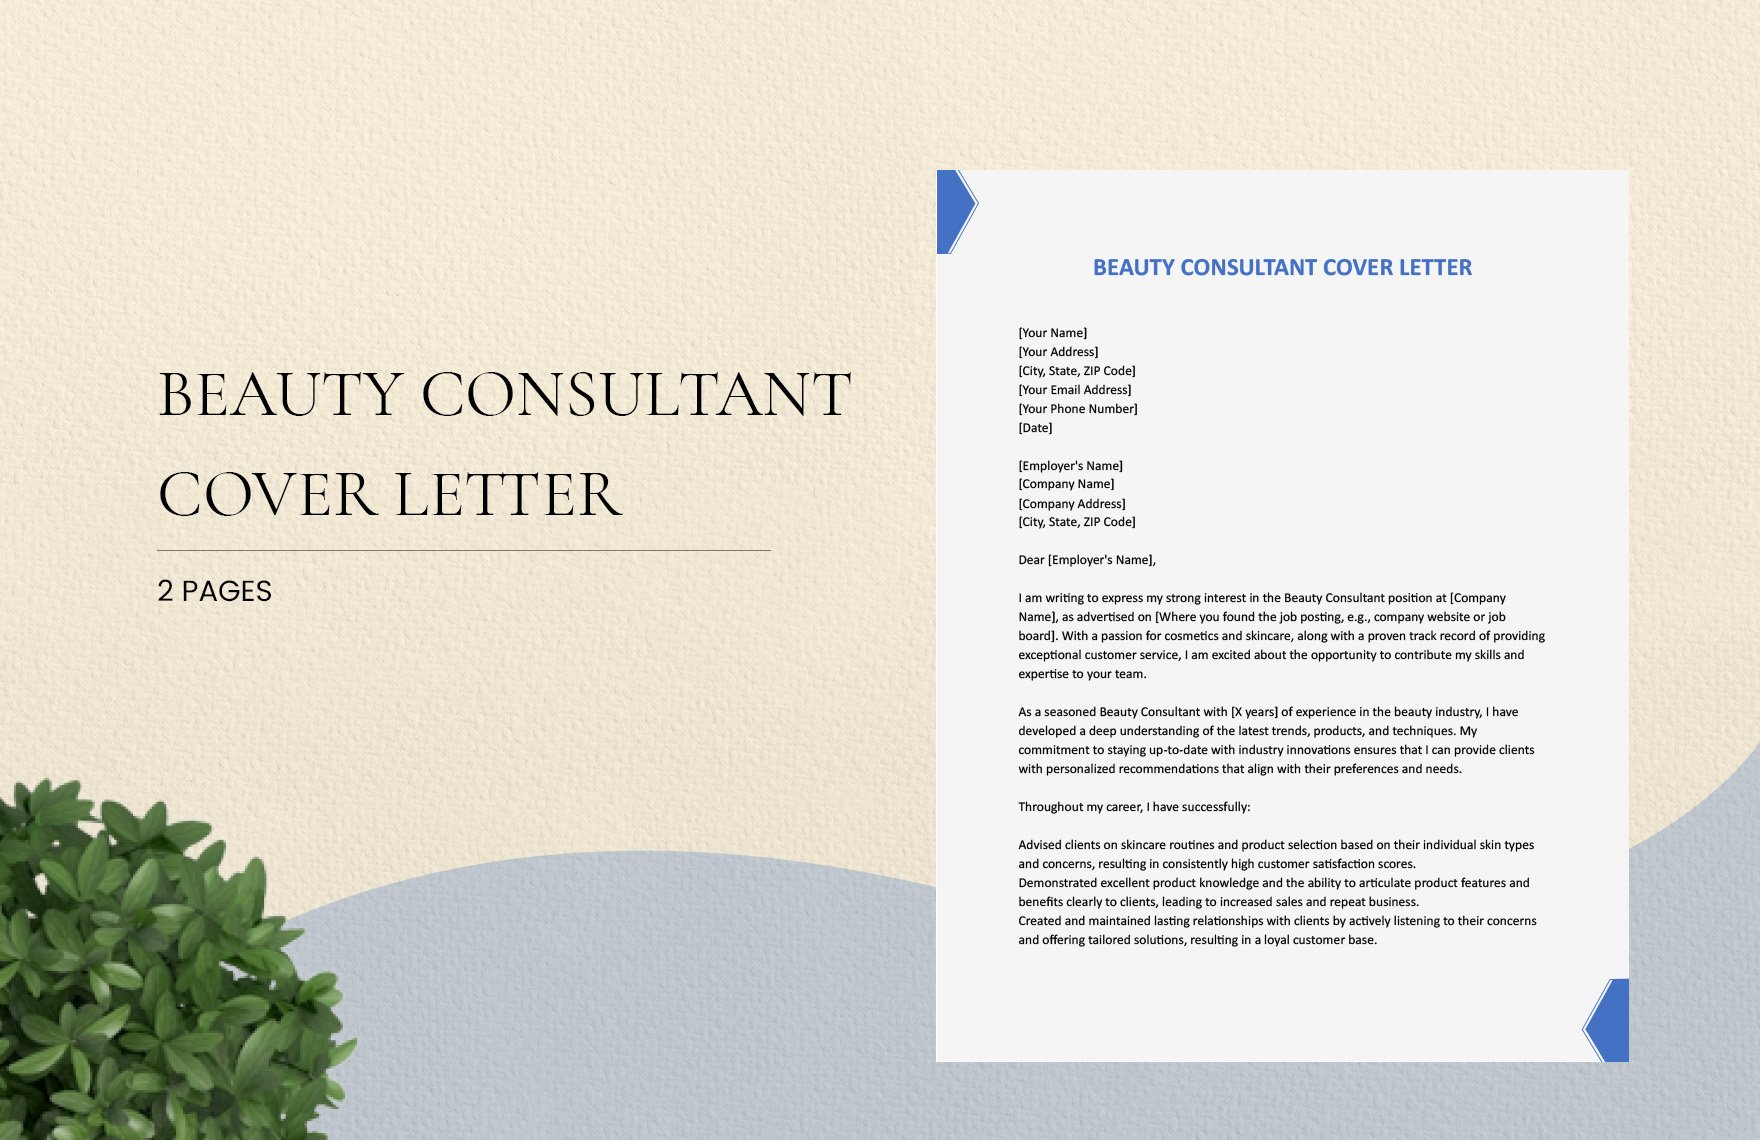 Beauty Consultant Cover Letter